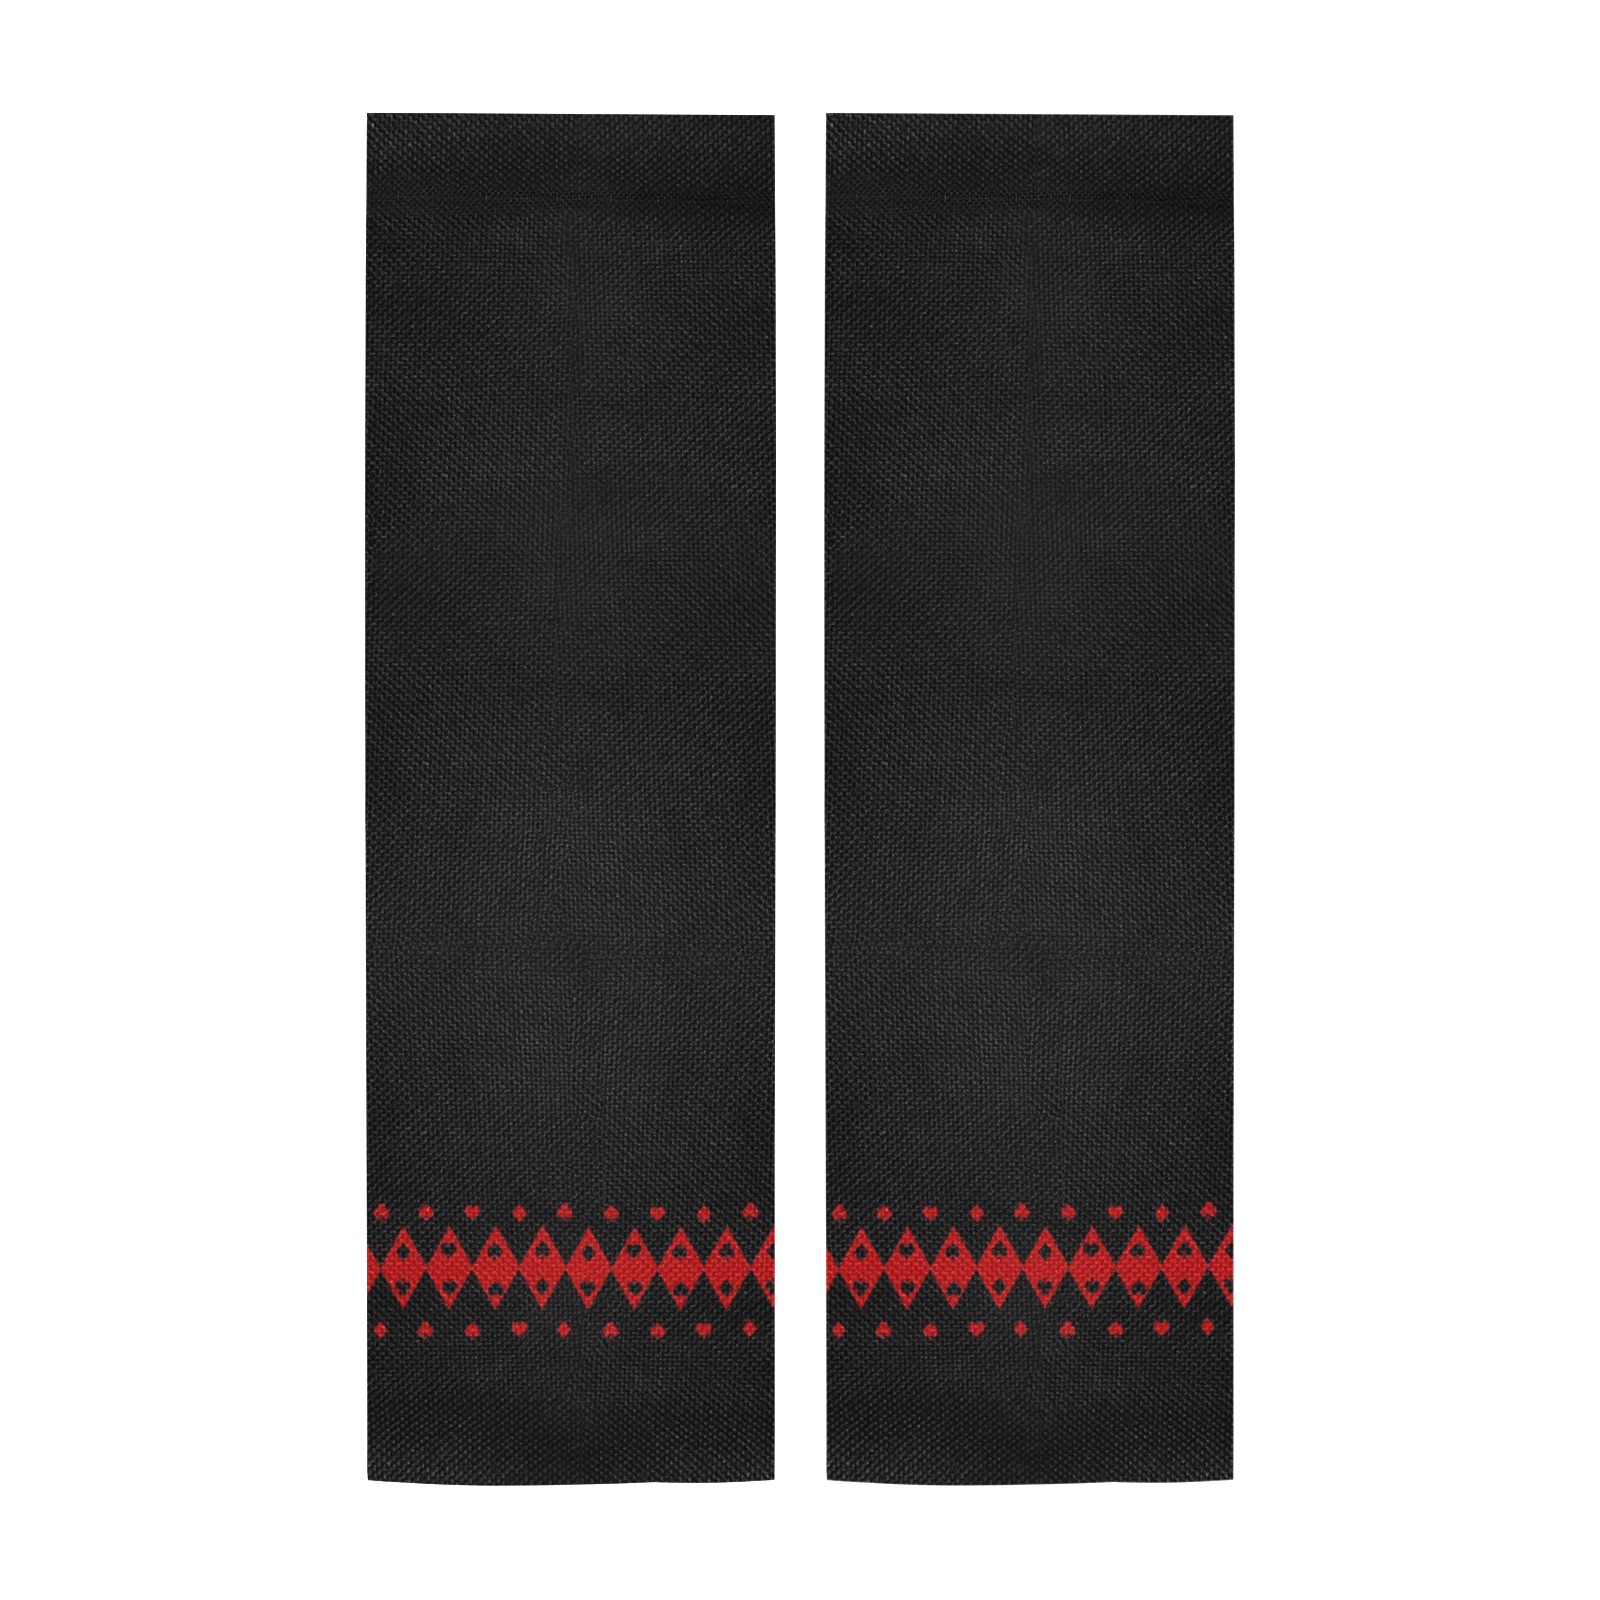 Black and Red Playing Card Shapes Door Curtain Tapestry